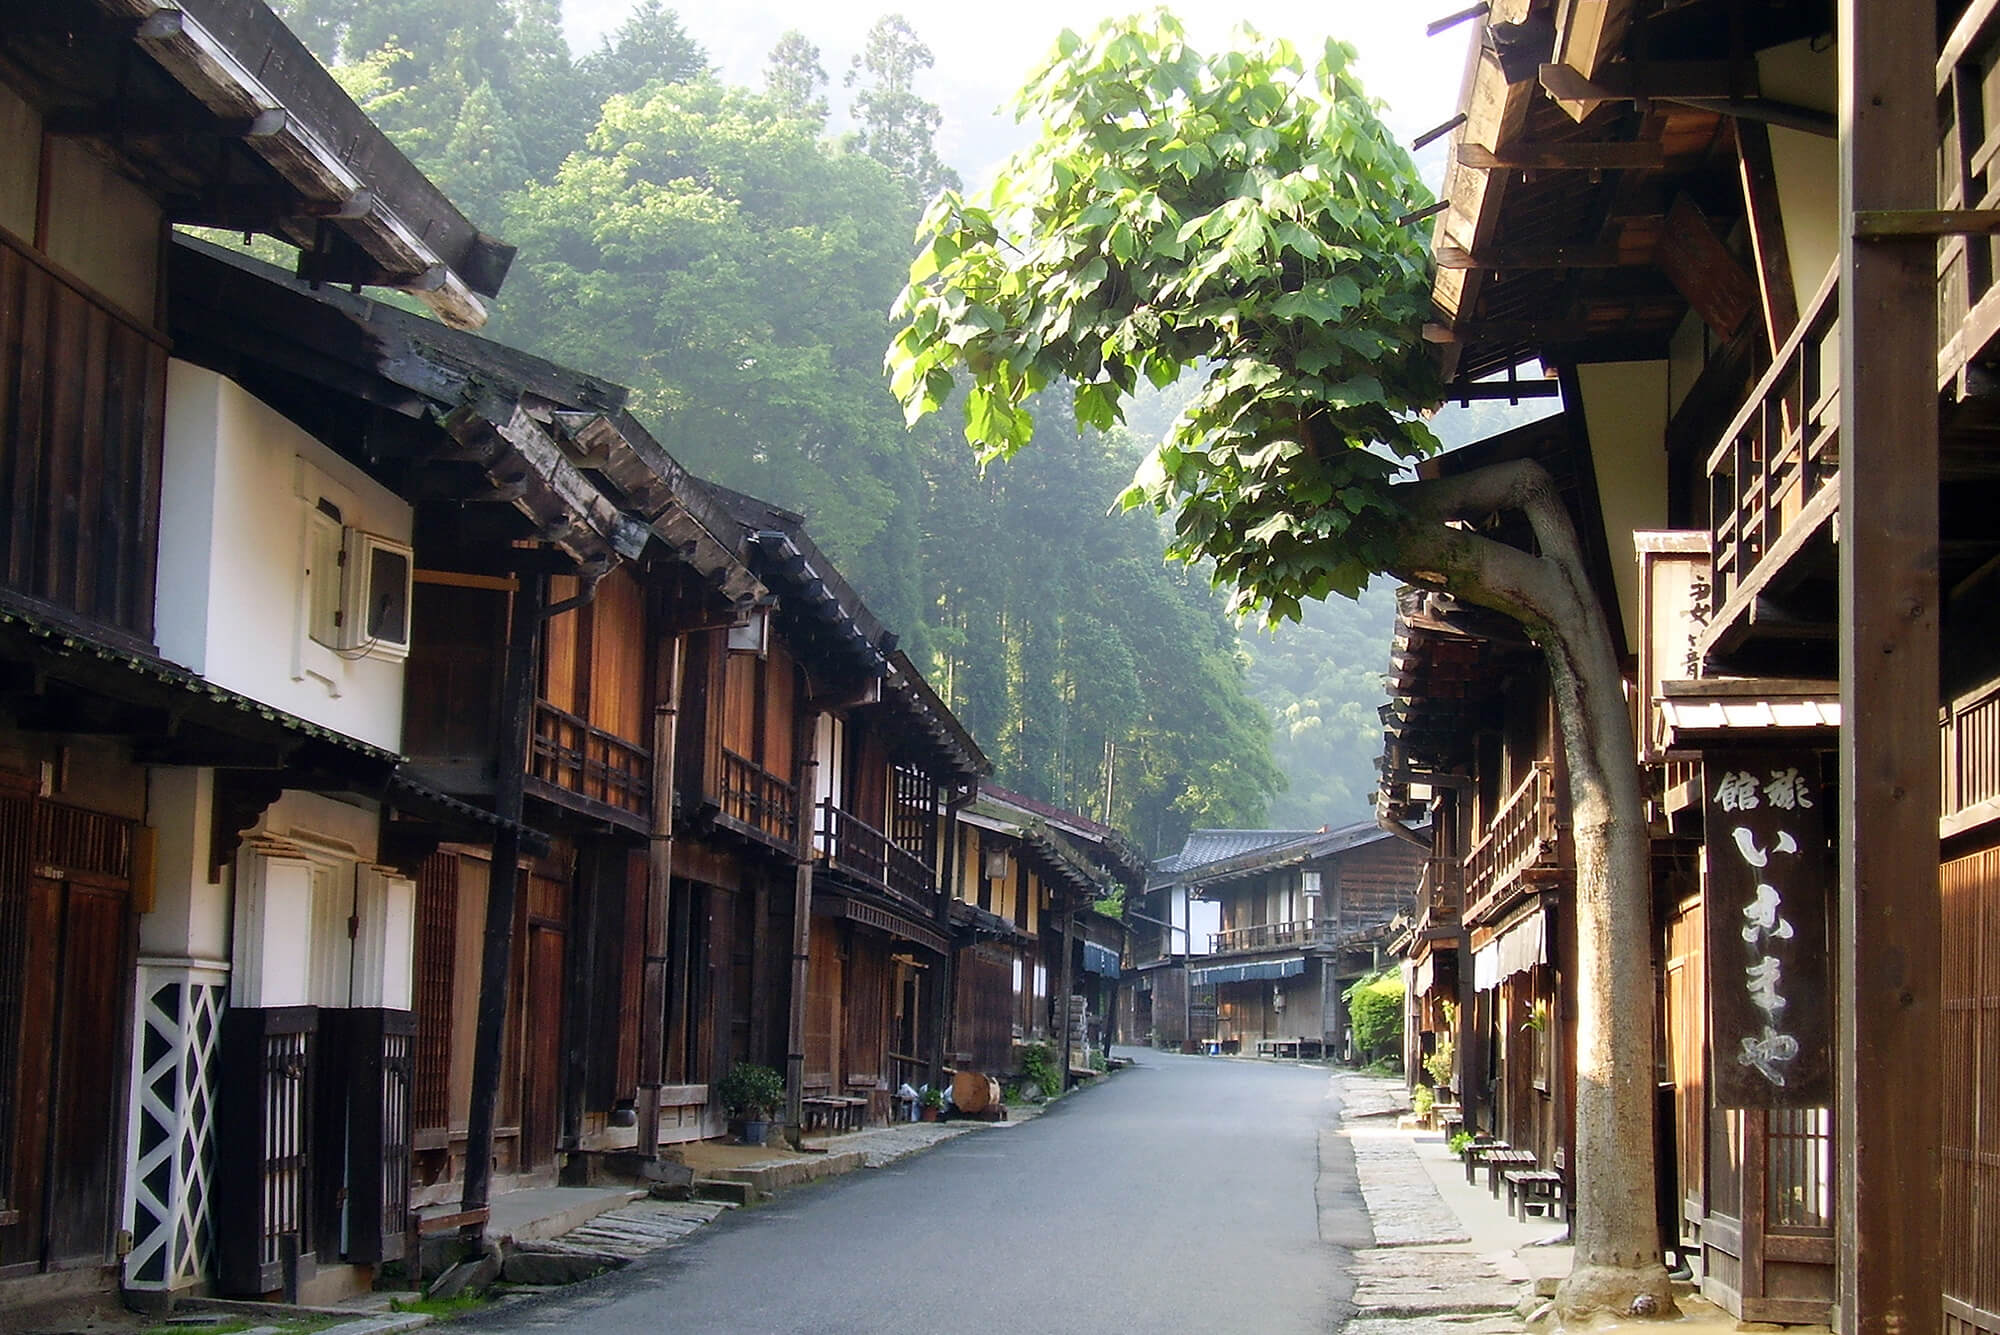 'Magomejuku' which still remains the historical townscape of the Edo era